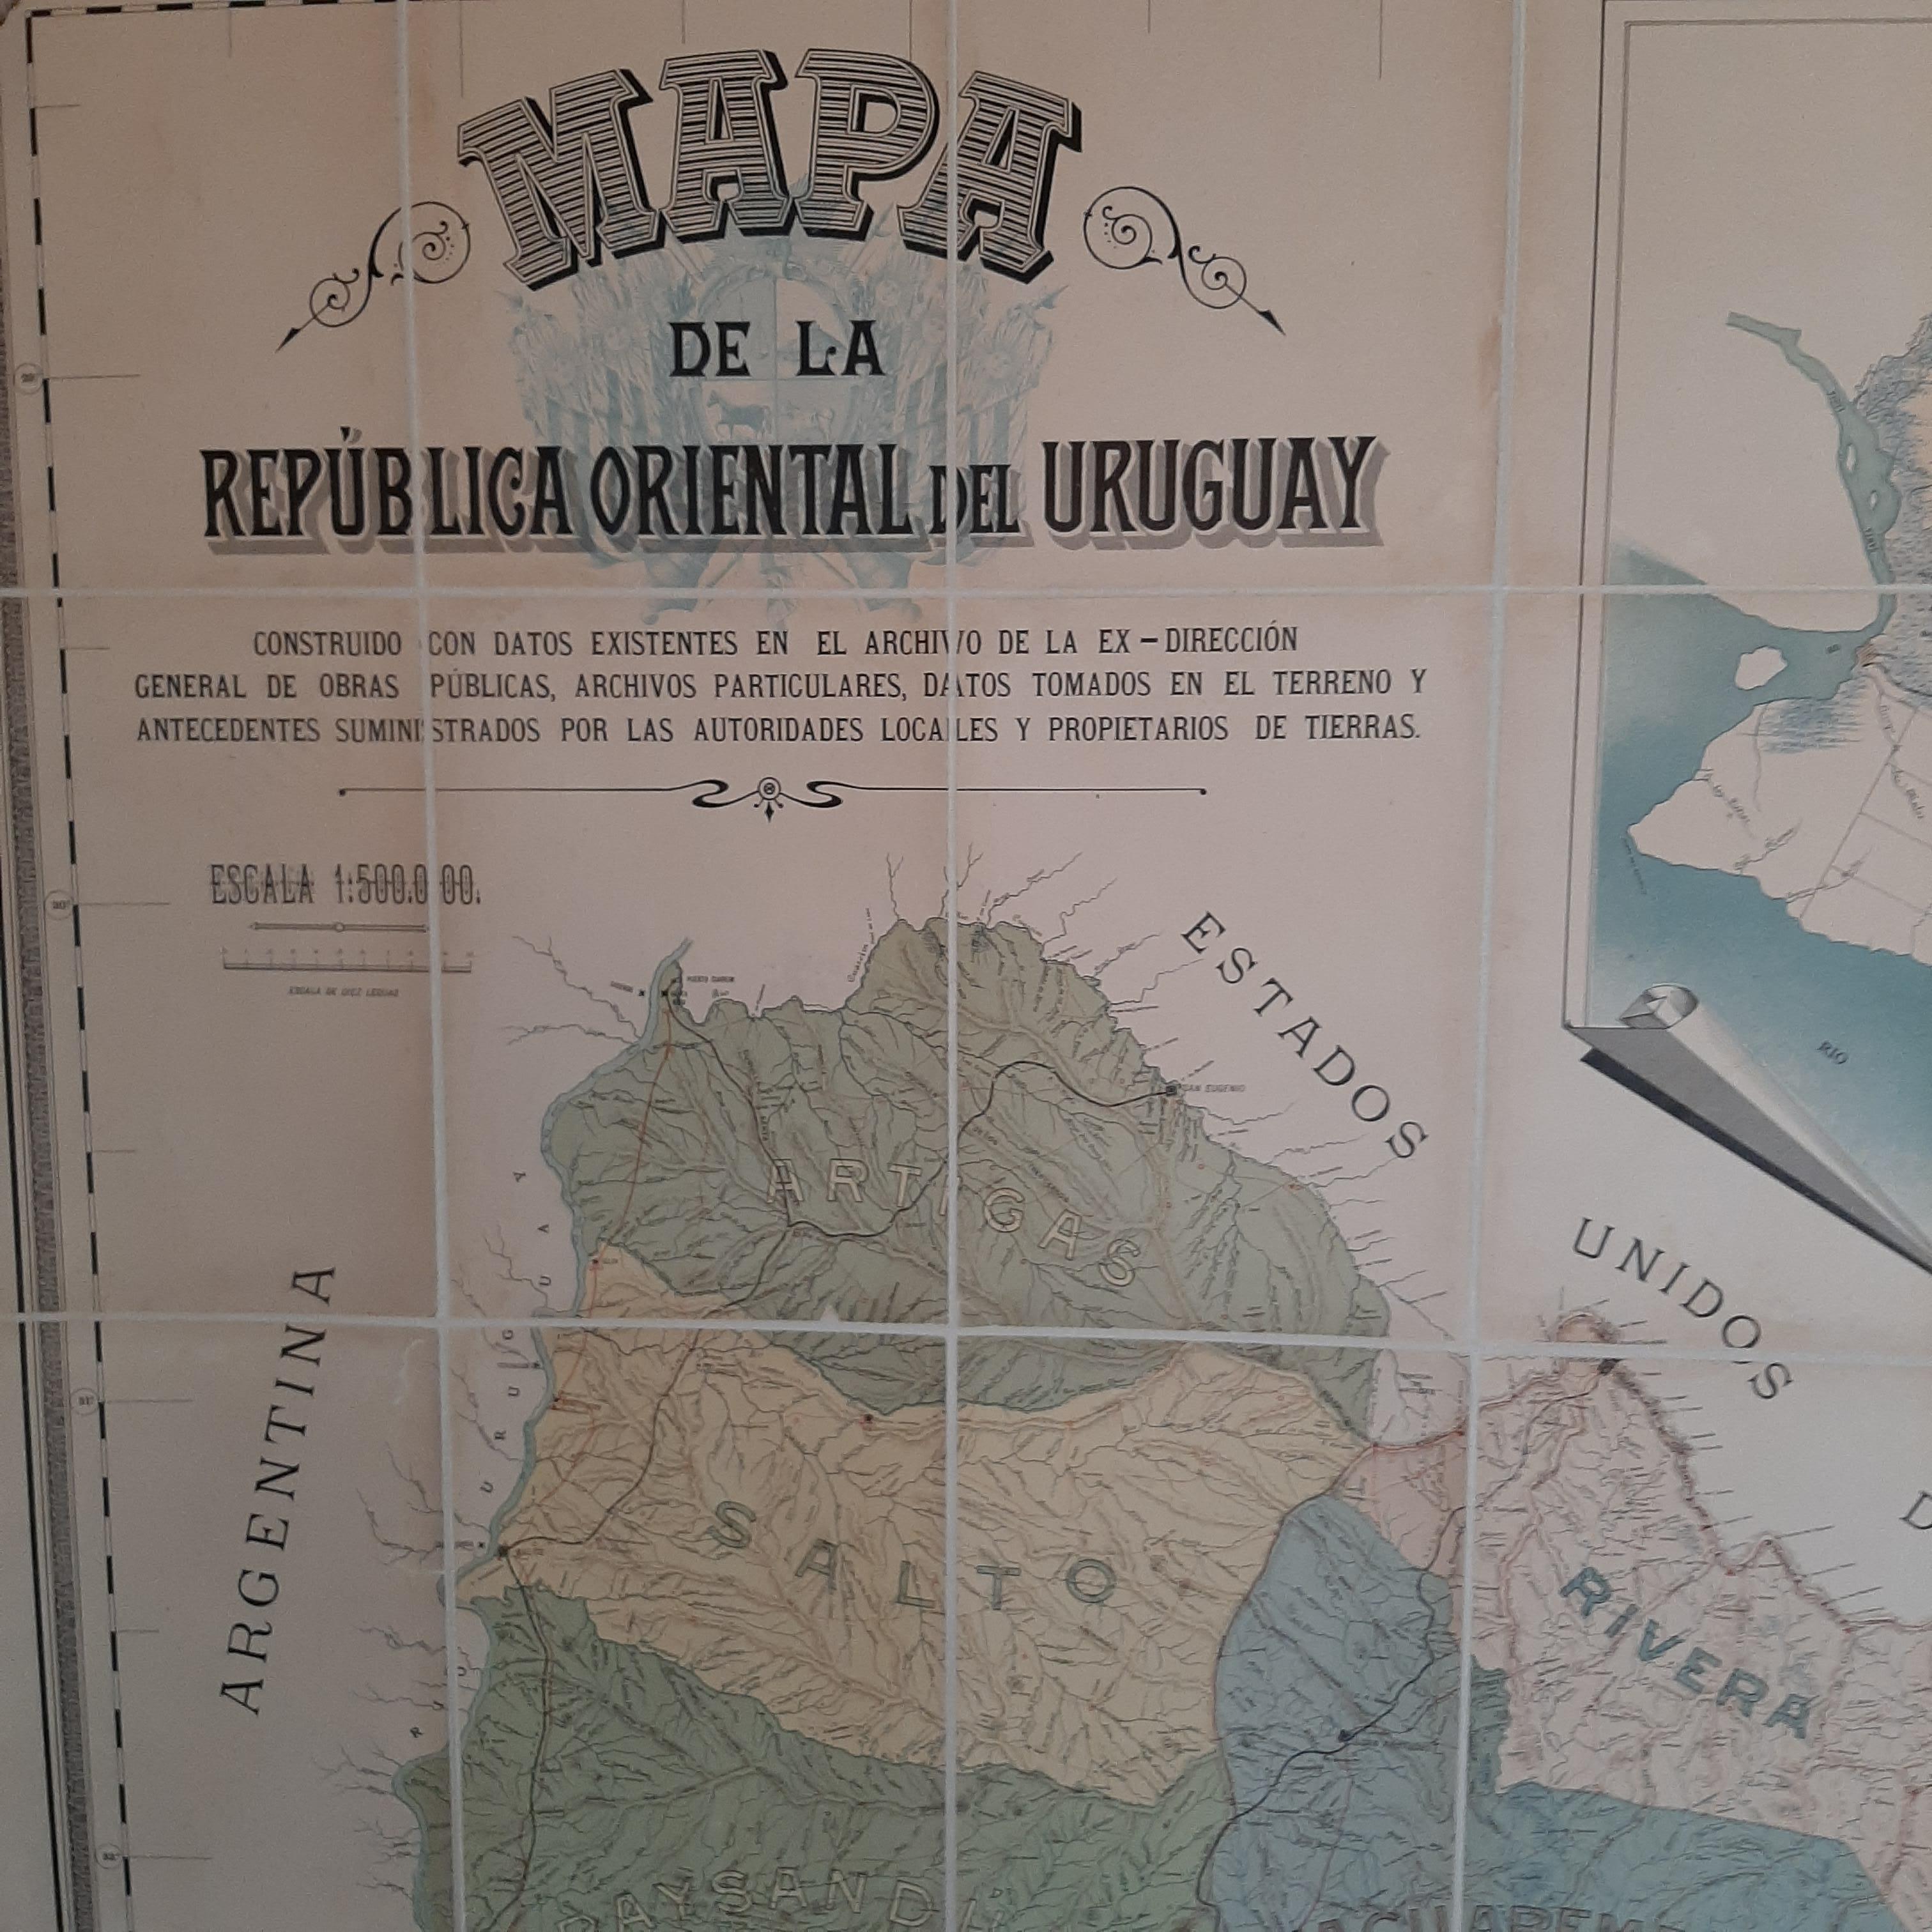 Antique map titled 'Mapa de la Republica Oriental del Uruguay'. Large and detailed folding map of Uruguay. This monumental map depicts all of Uruguay with unprecedented accuracy and detail. Impressively, it serves the multiple roles of being an